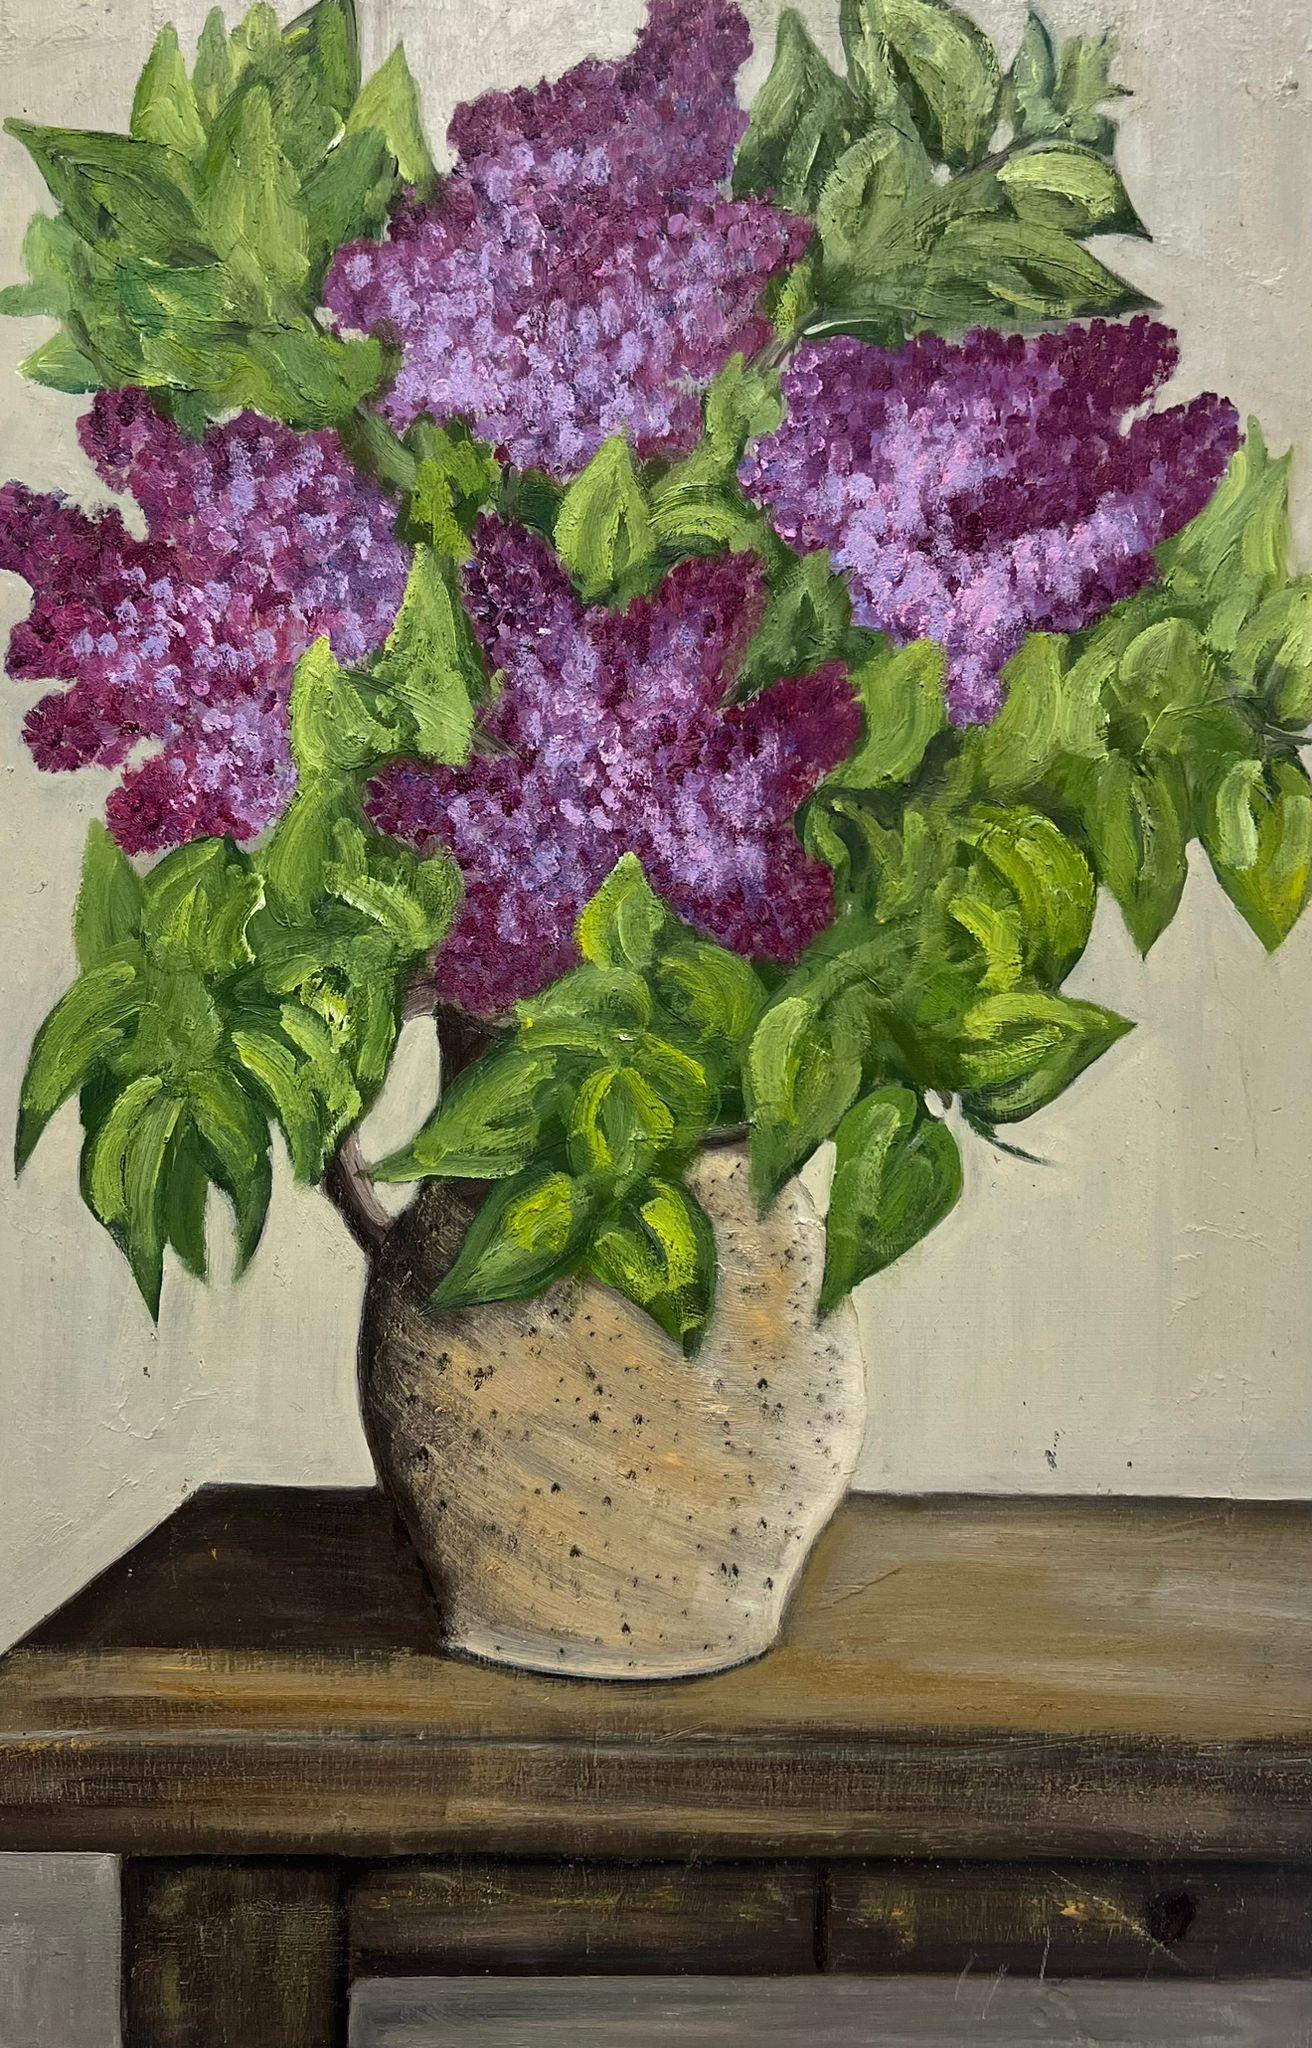 Mid 20th Century French Oil Painting Purple Syringa Vulgaris Flowers Still Life - Gray Still-Life Painting by Louise Alix